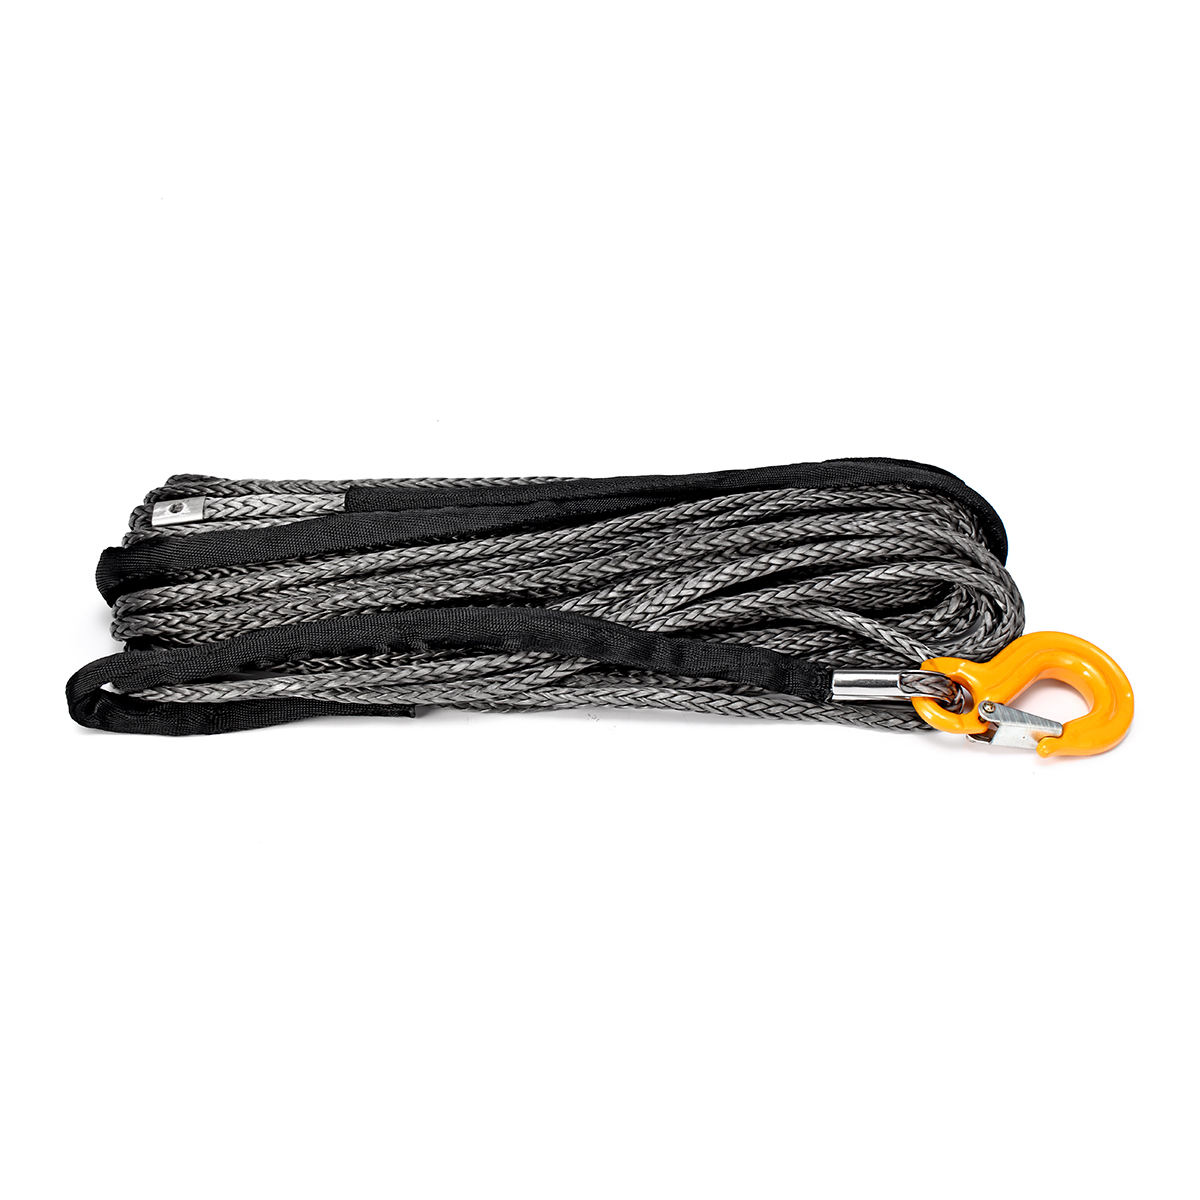 New Warrior Black Edition Synthetic Winch Rope High Molecular Polyethylene Fiber Rope Tow Rope 2